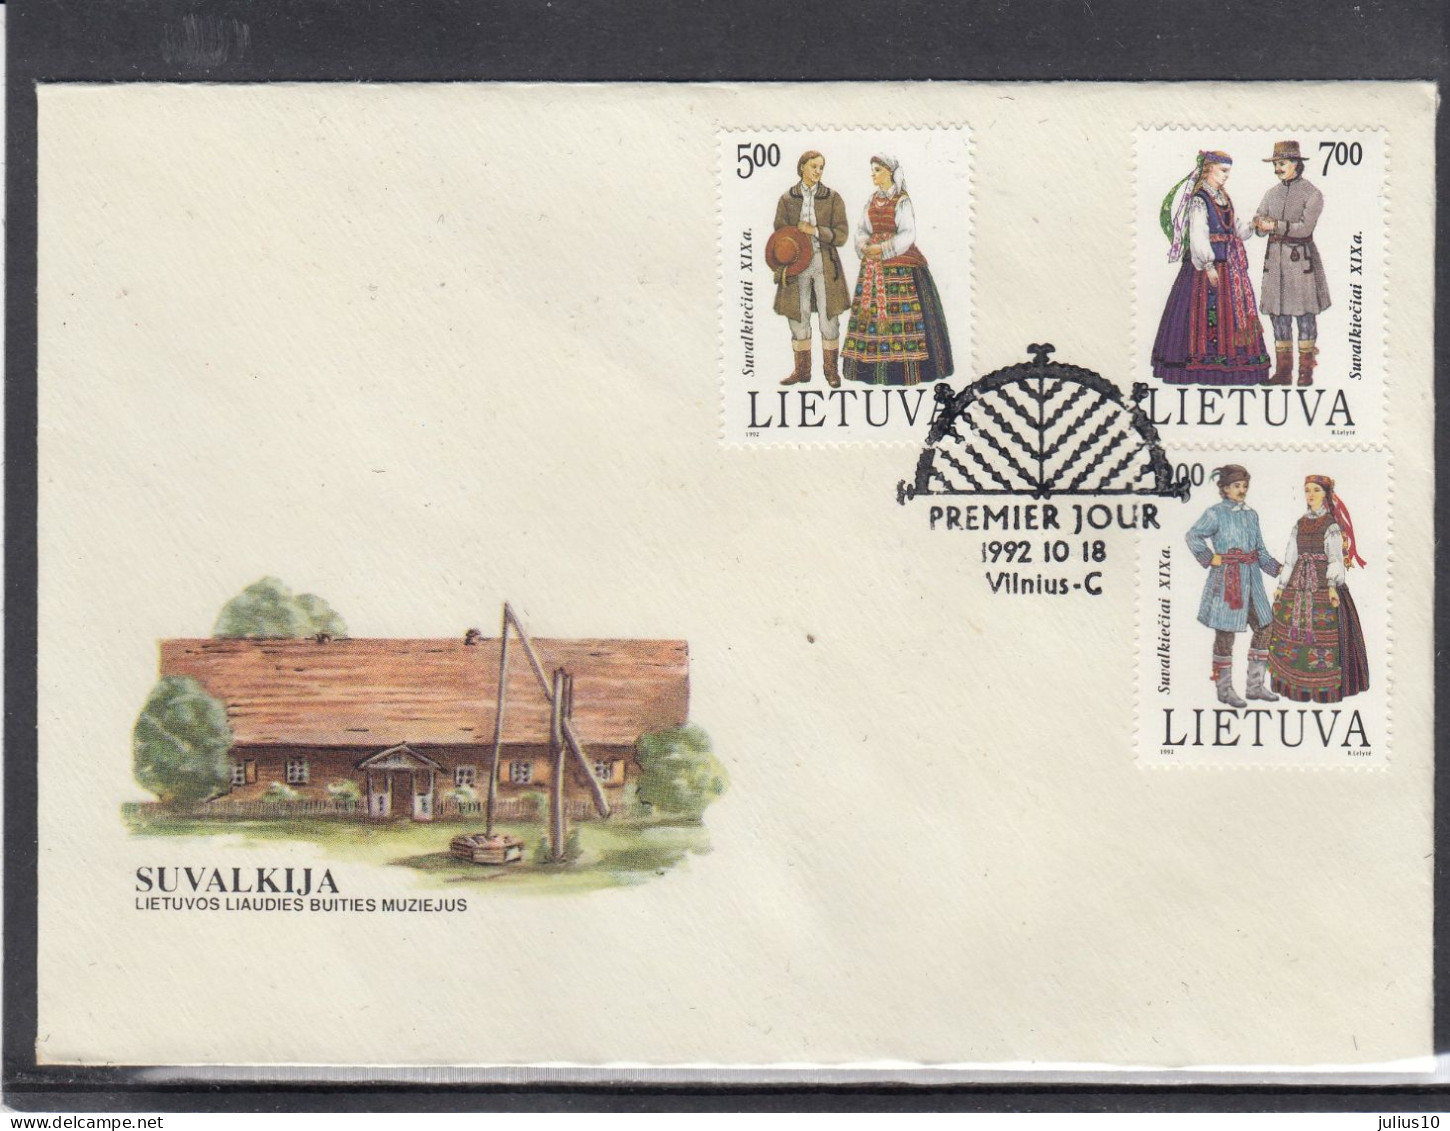 LITHUANIA 1992 National Costumes FDC Mi 508-510 #LTV237 - Lithuania